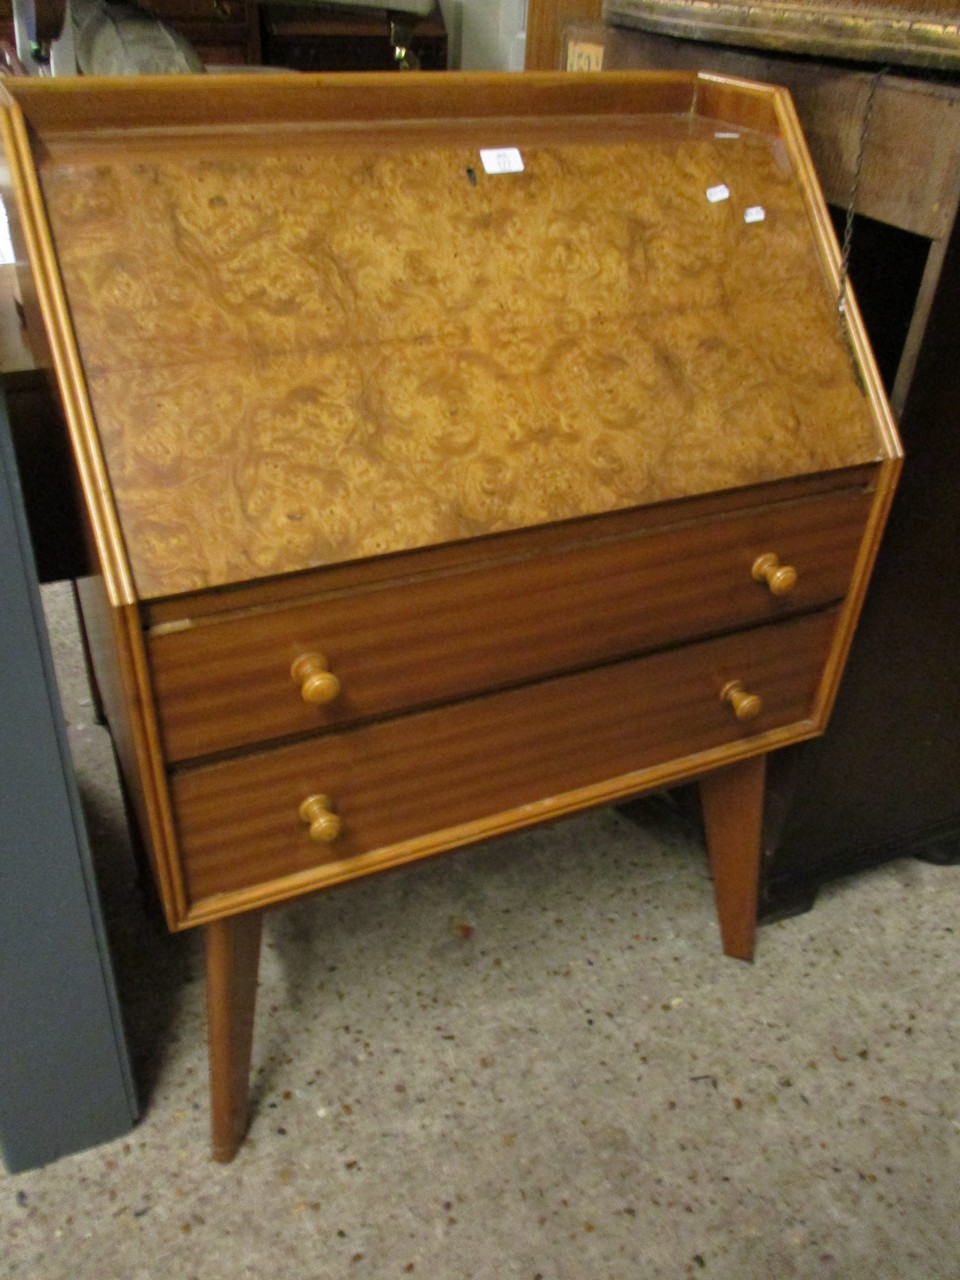 TEAK FRAMED WALNUT DROP FRONTED BUREAU WITH TWO DRAWERS ON SPLAYED LEGS